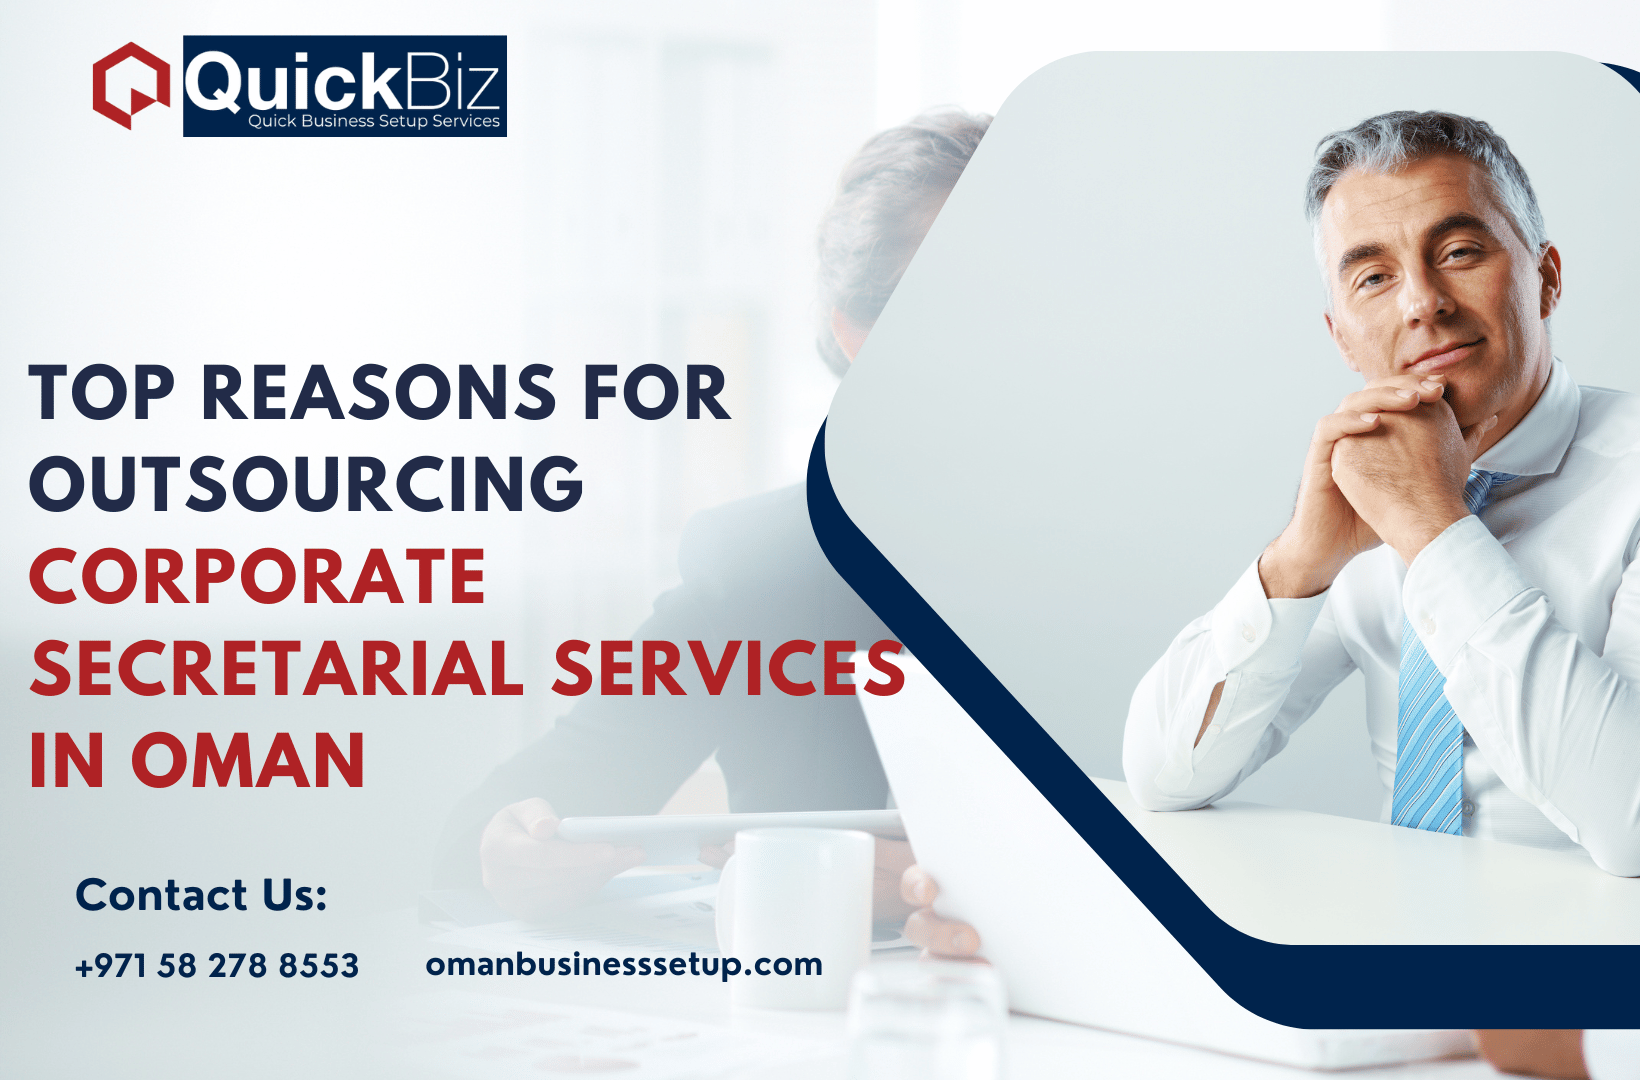 Top Reasons for Outsourcing Corporate Secretarial Services in Oman